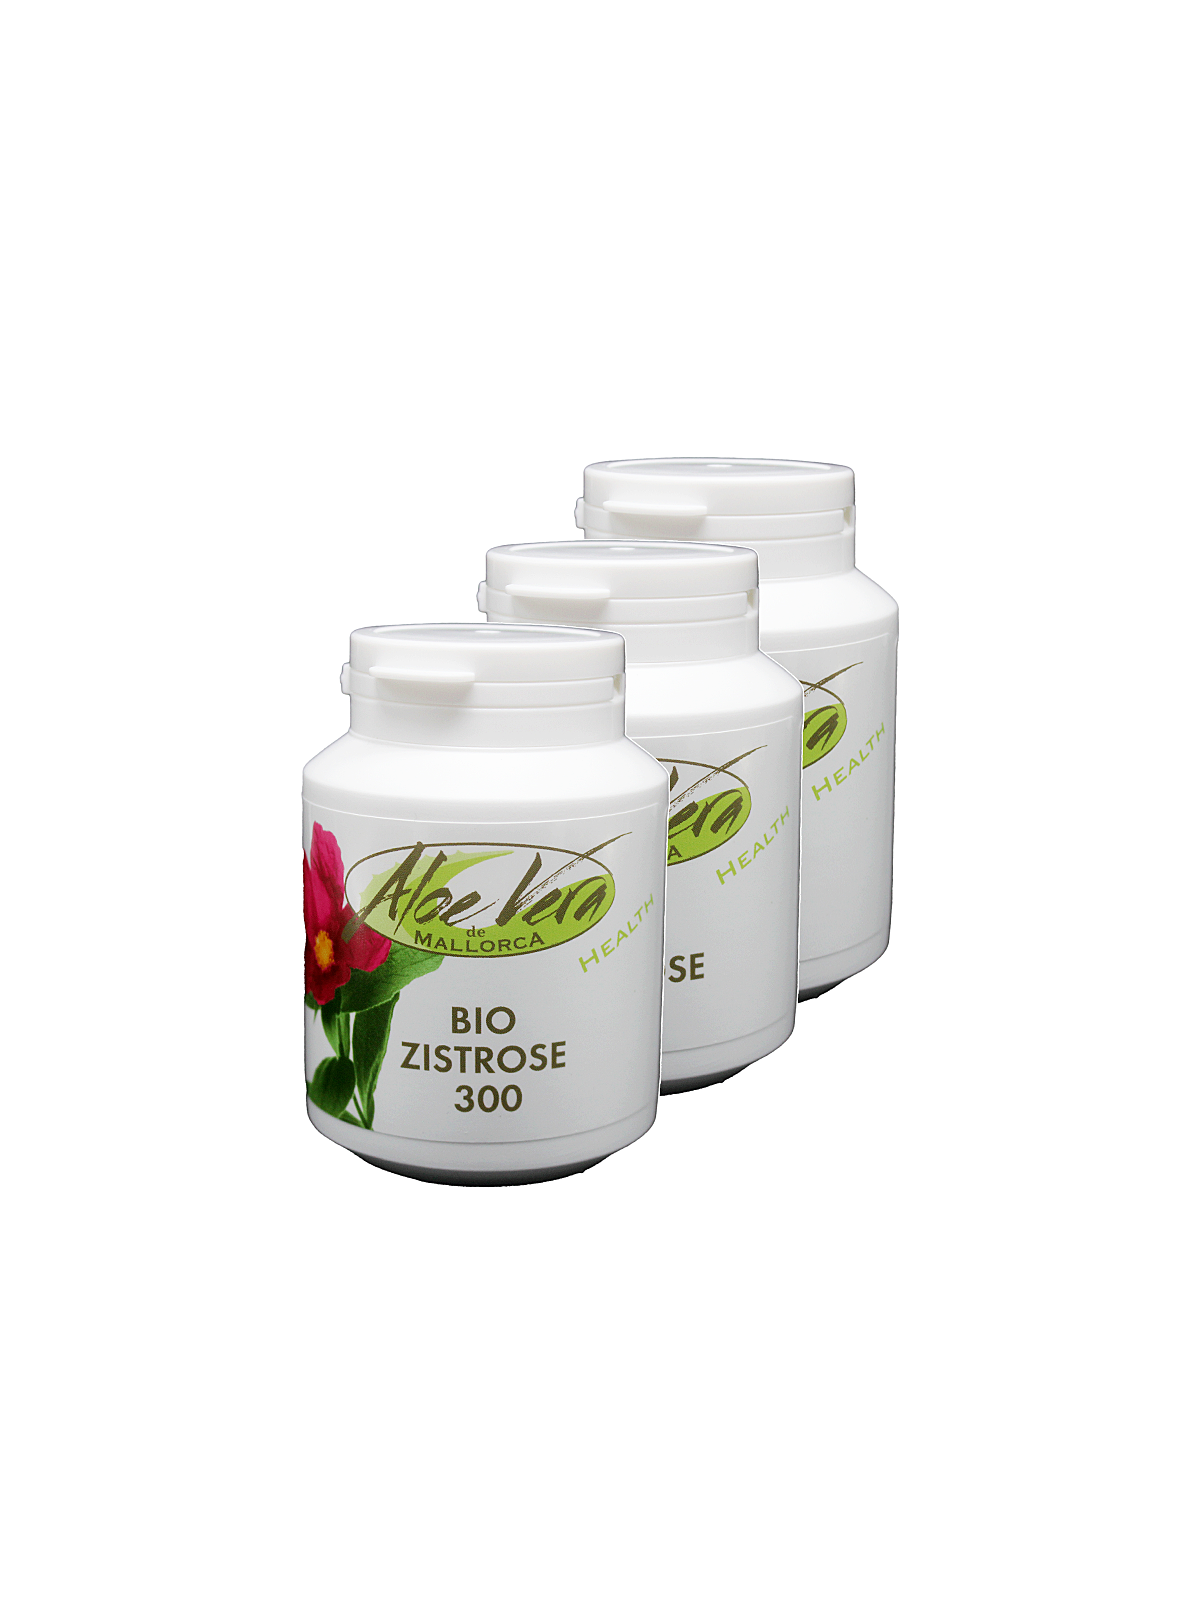 Organic rockrose capsule 3 for the price of 2